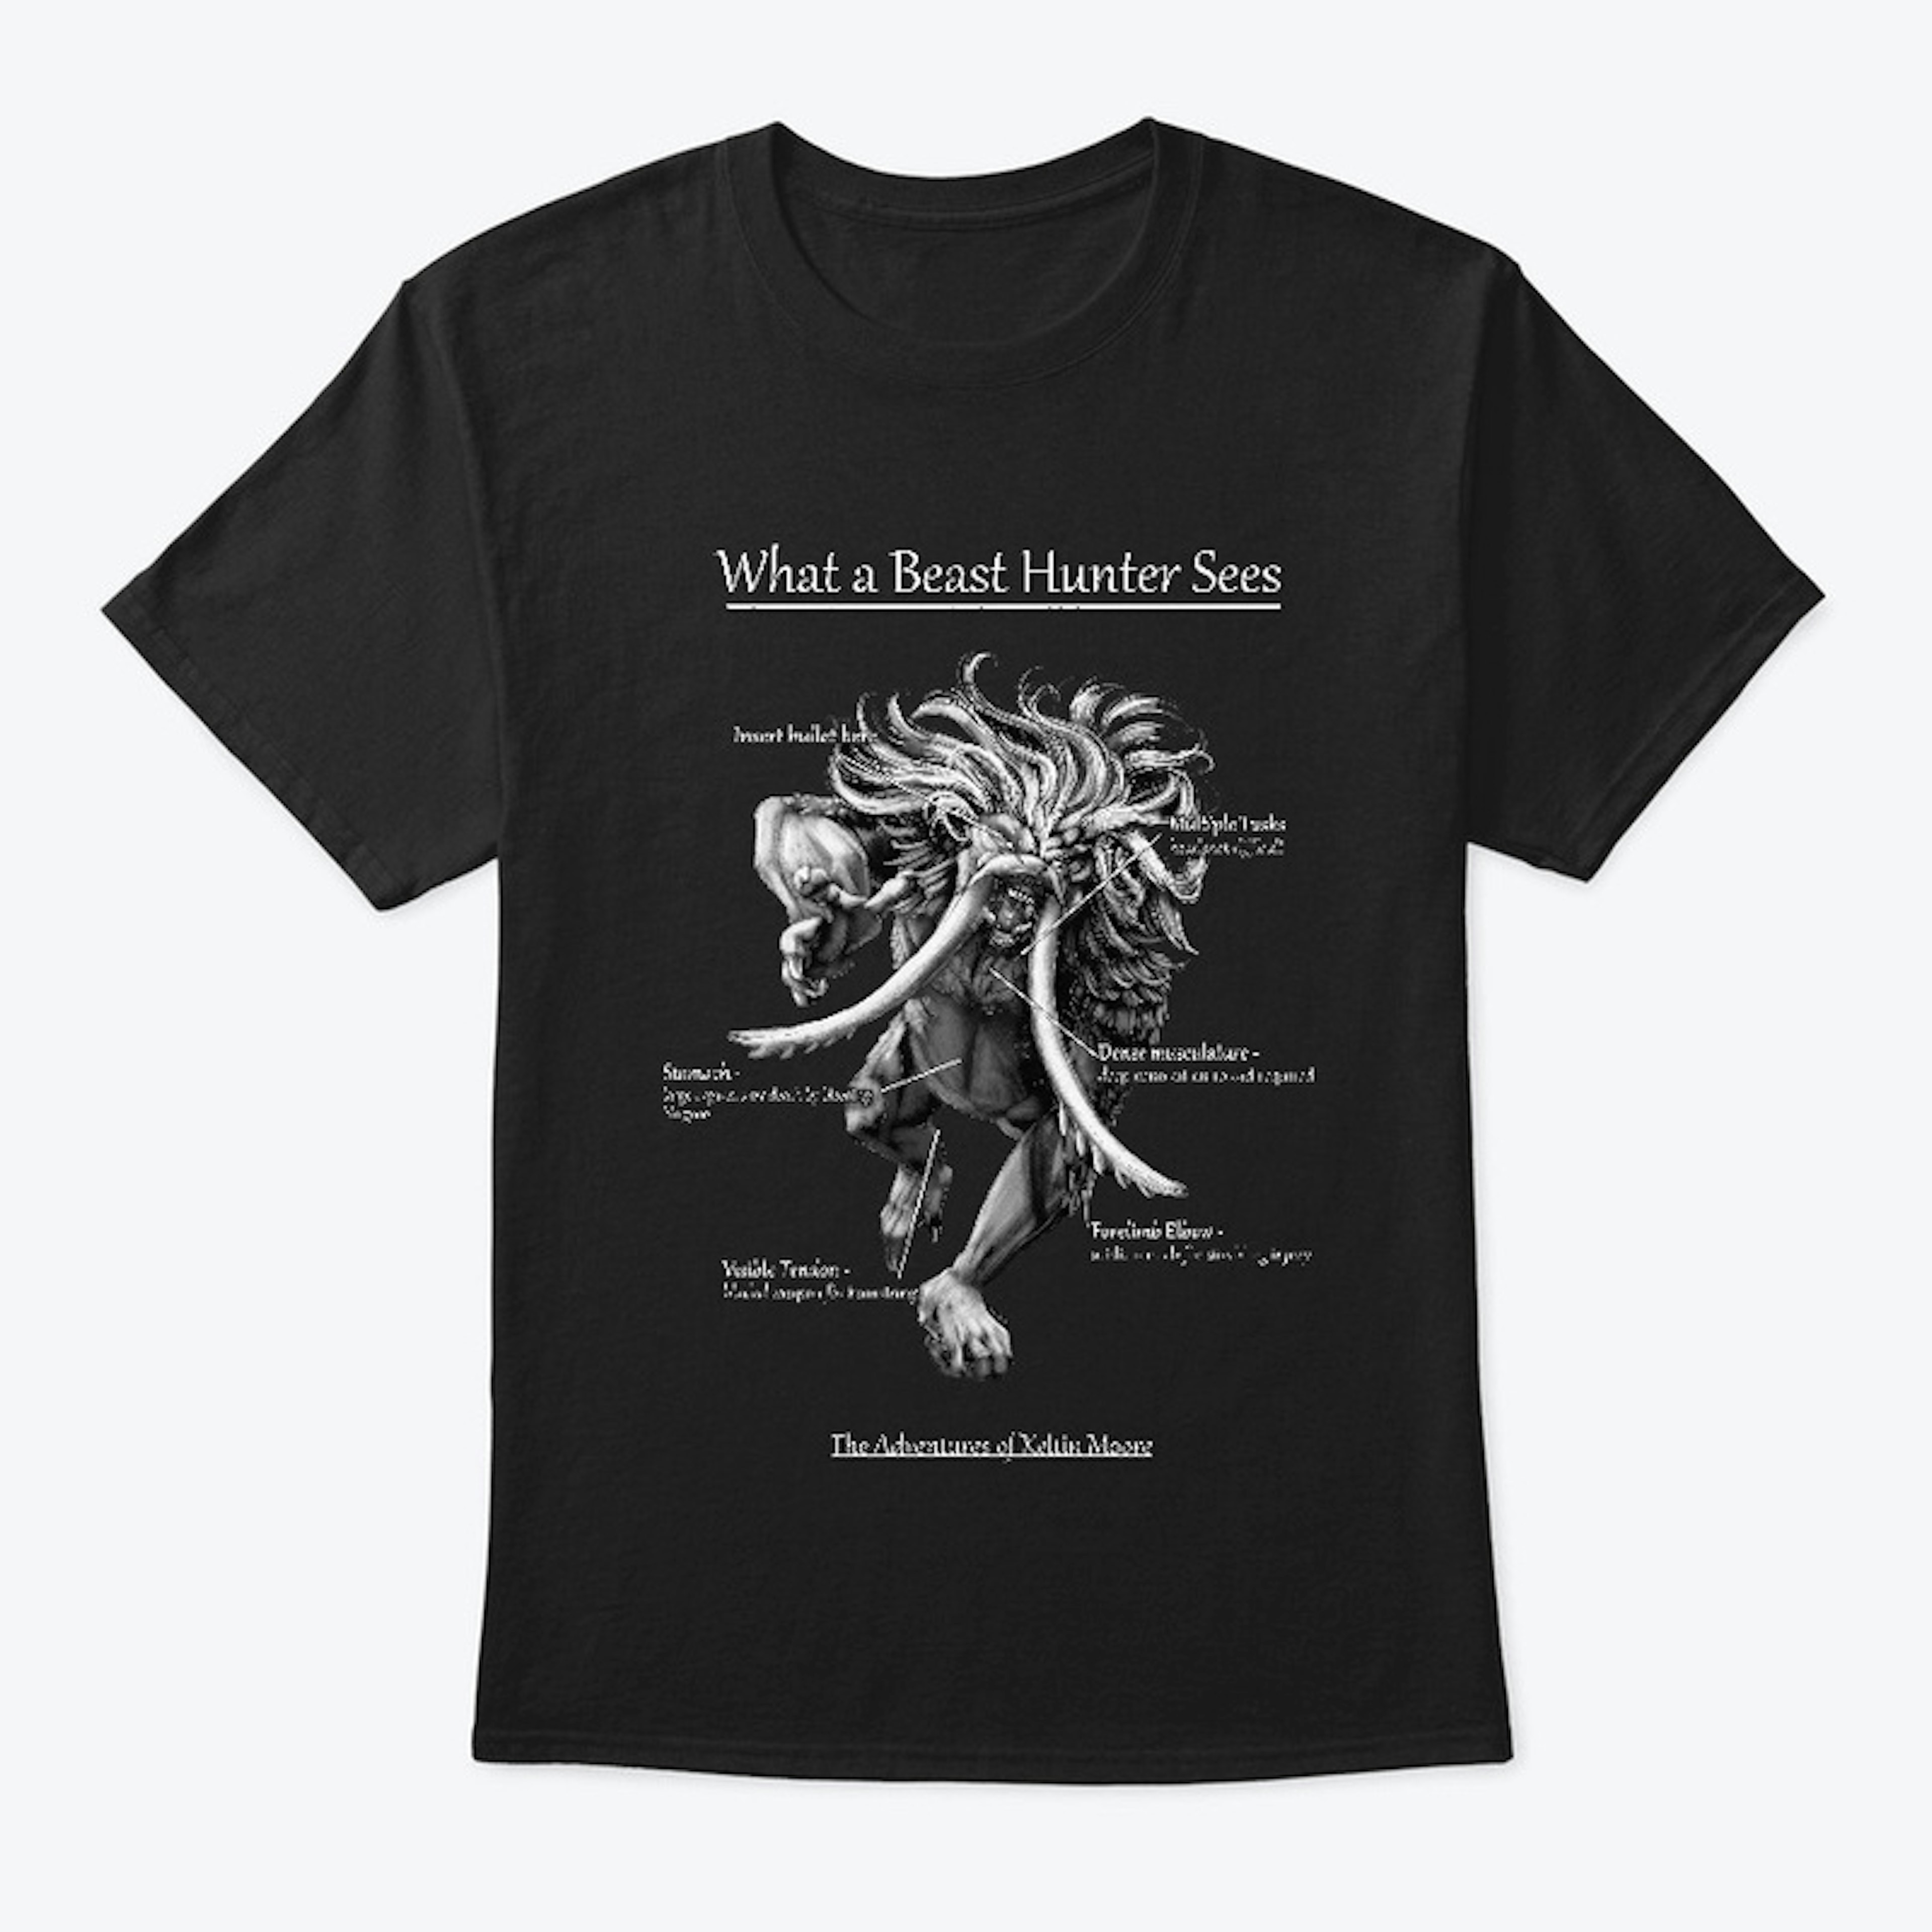 What a Beast Hunter Sees Shirts and Bags